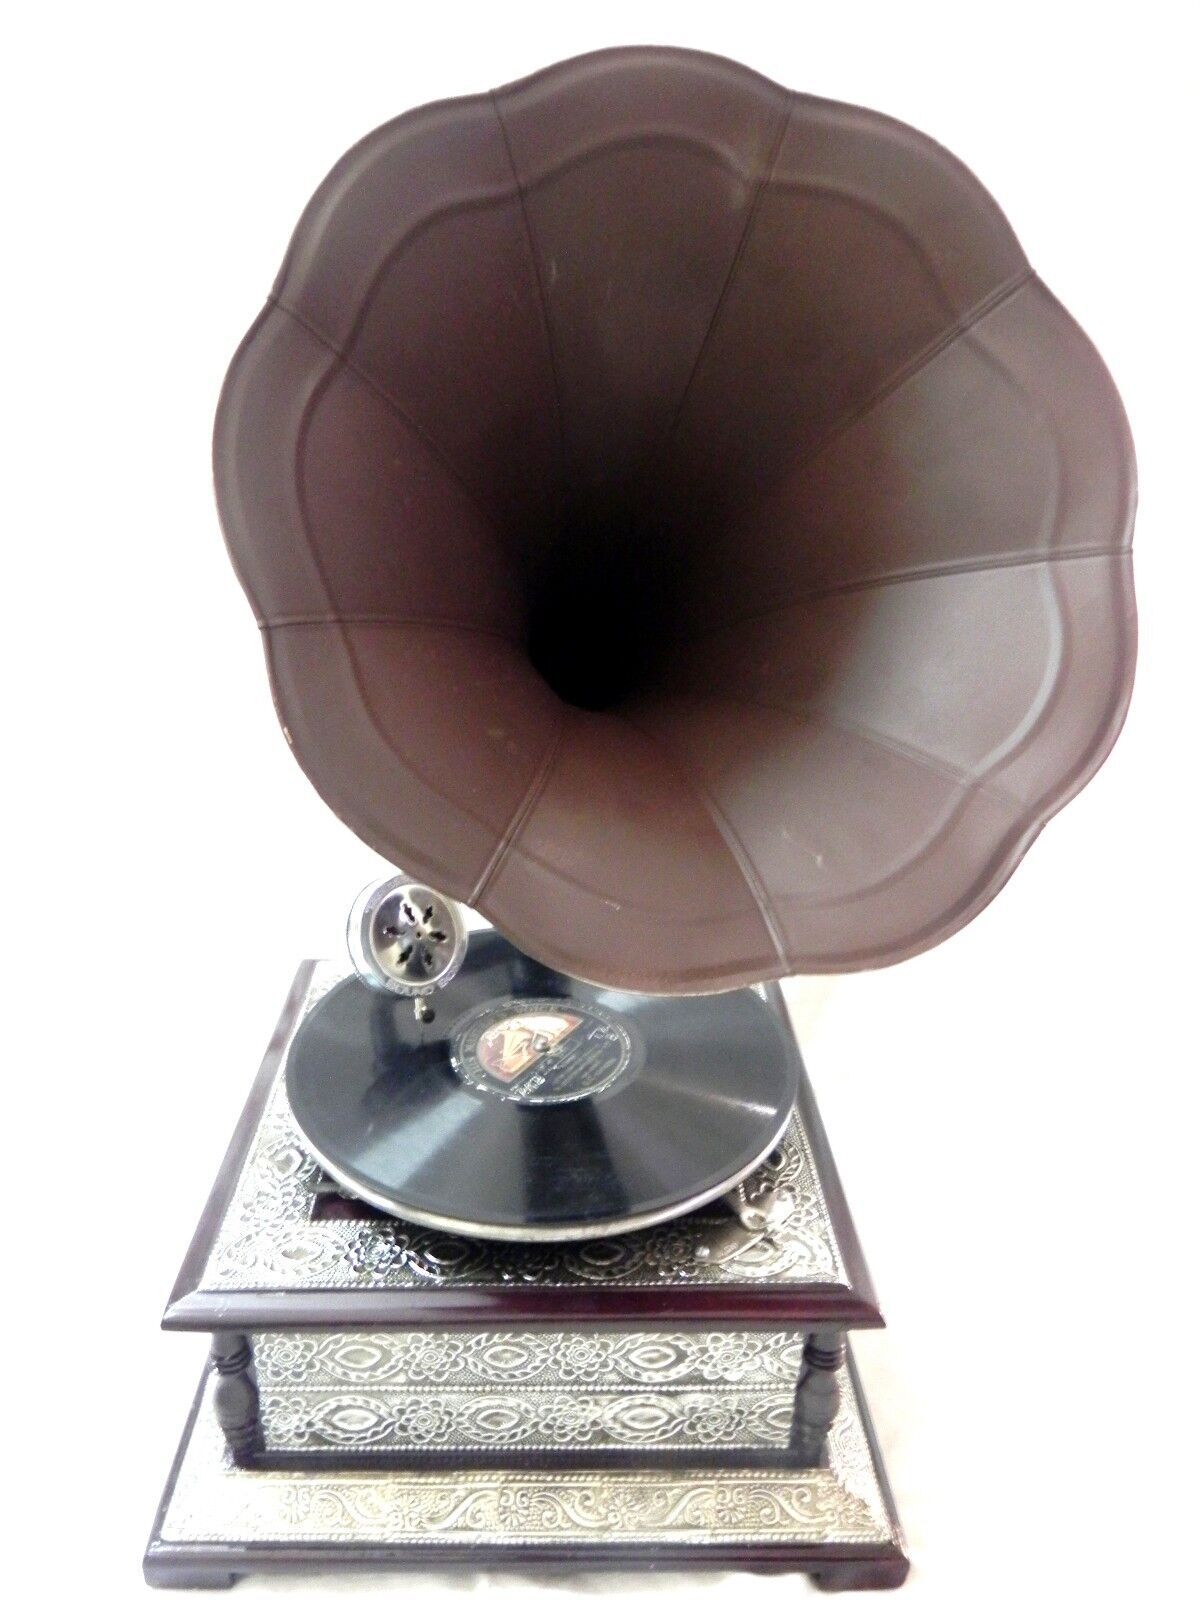 ANTIQUE GRAMOPHONE PHONOGRAPH CRAFTED MACHINE WITH BROWN COLOR STEEL HORN